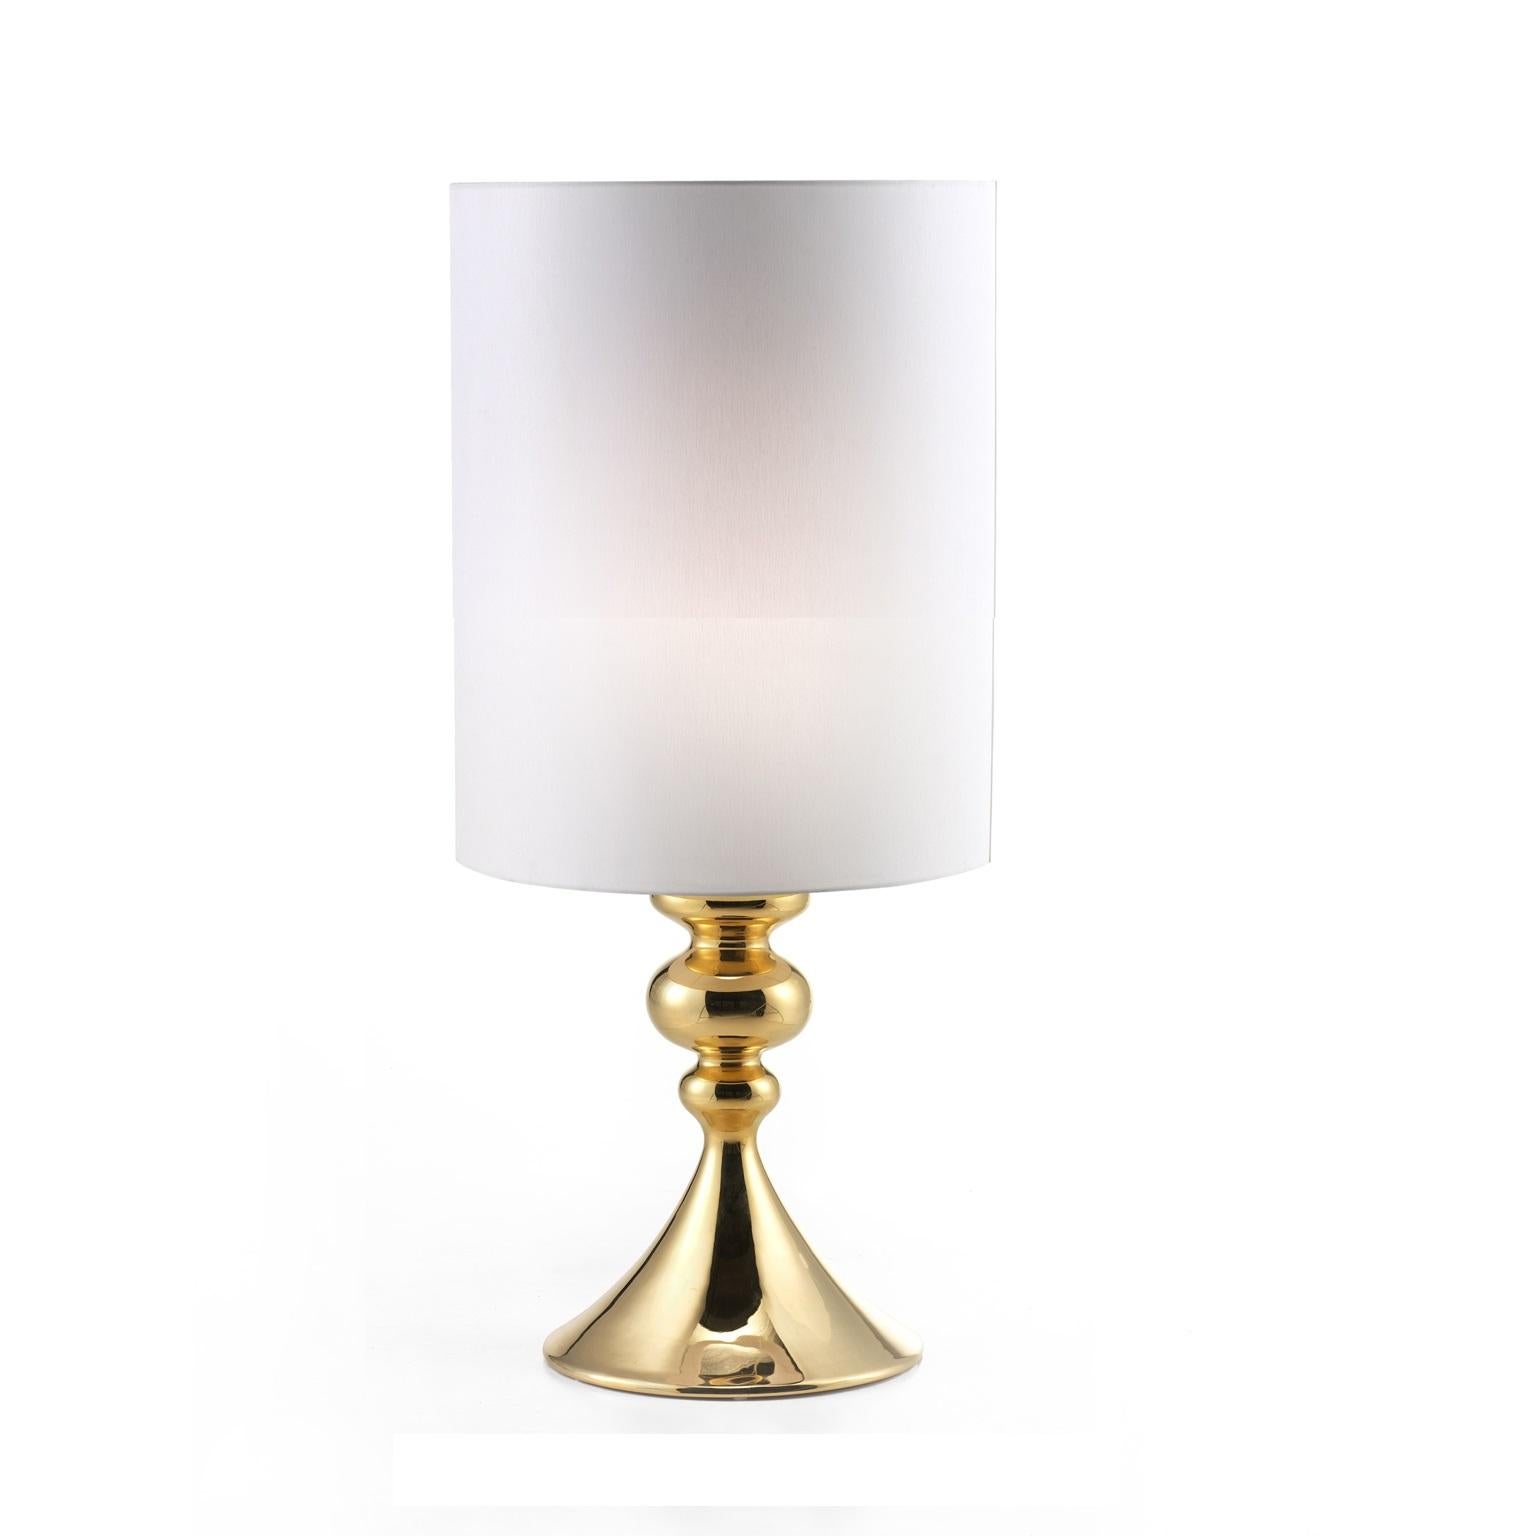 KAY, Ceramic Lamp Handcrafted in 24-Karat Gold by Gabriella B. Made in Italy In New Condition For Sale In Treviso, IT